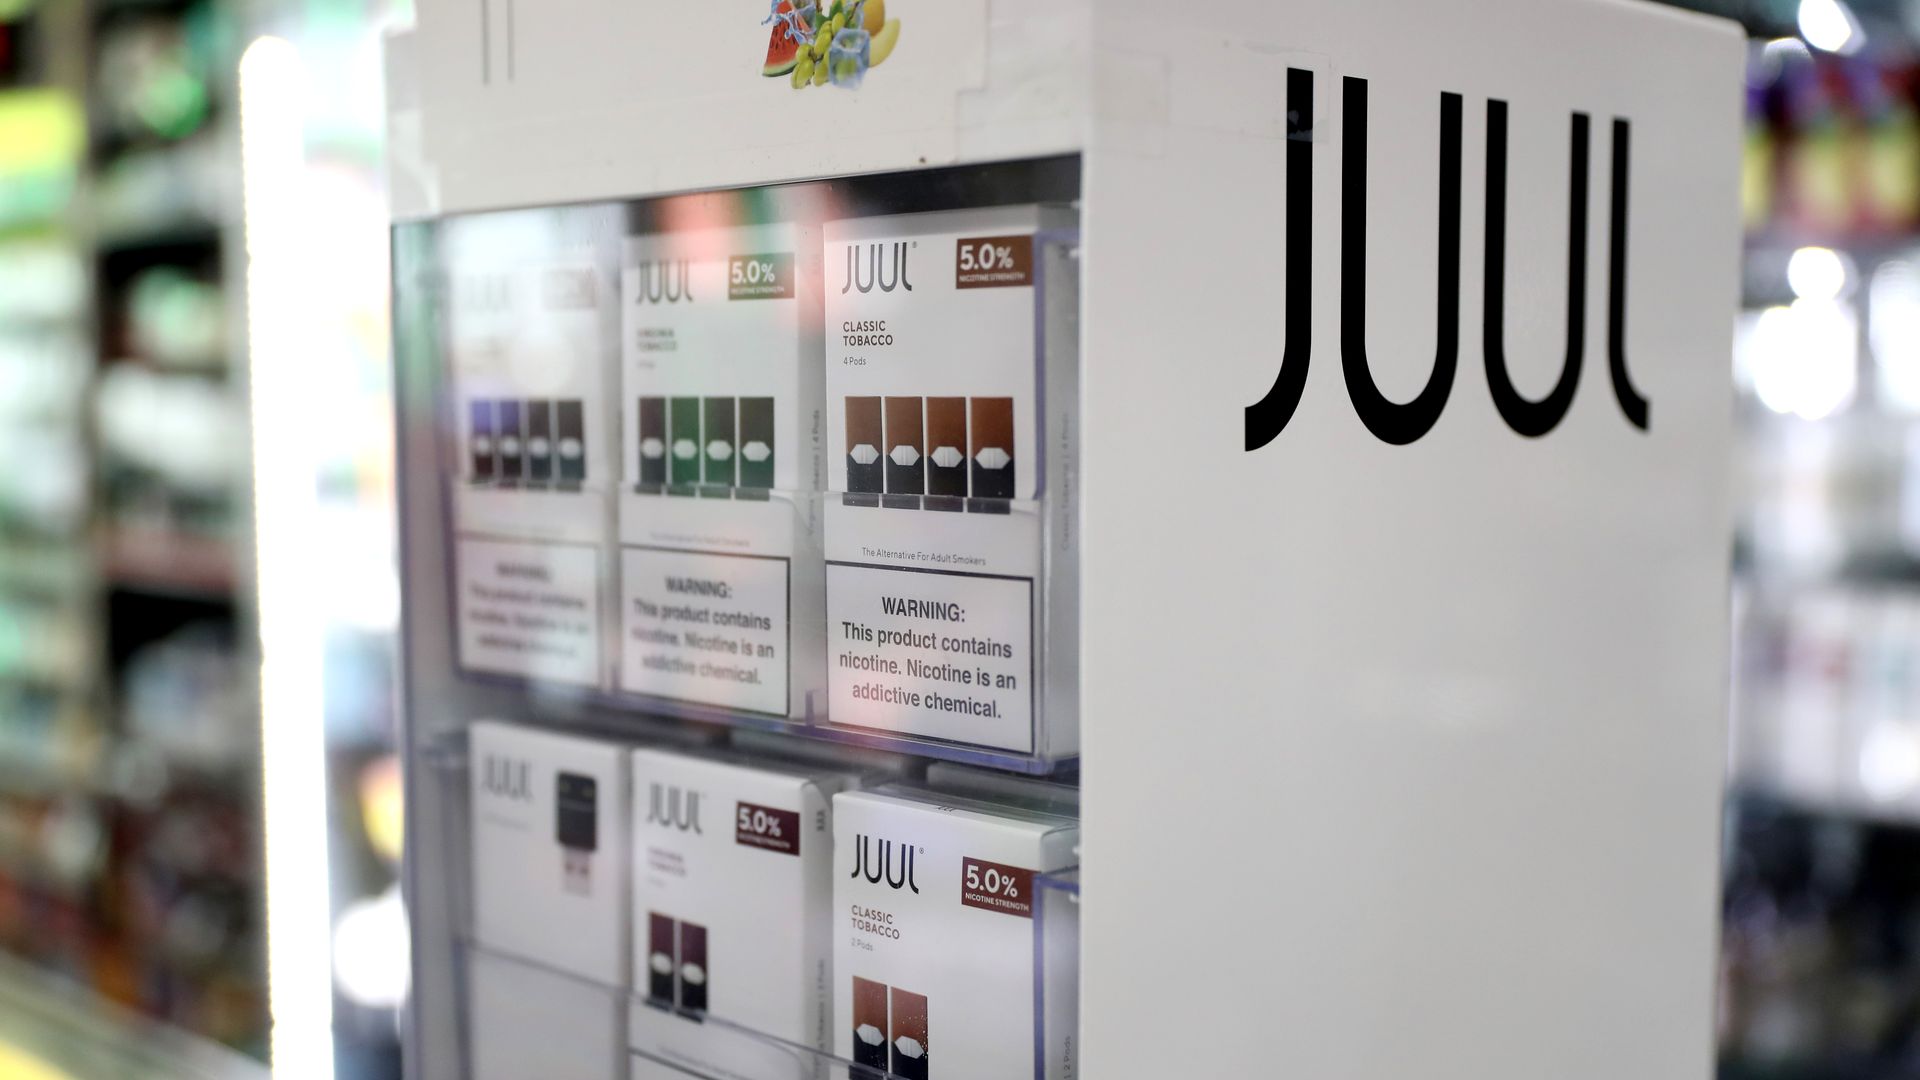 Juul products